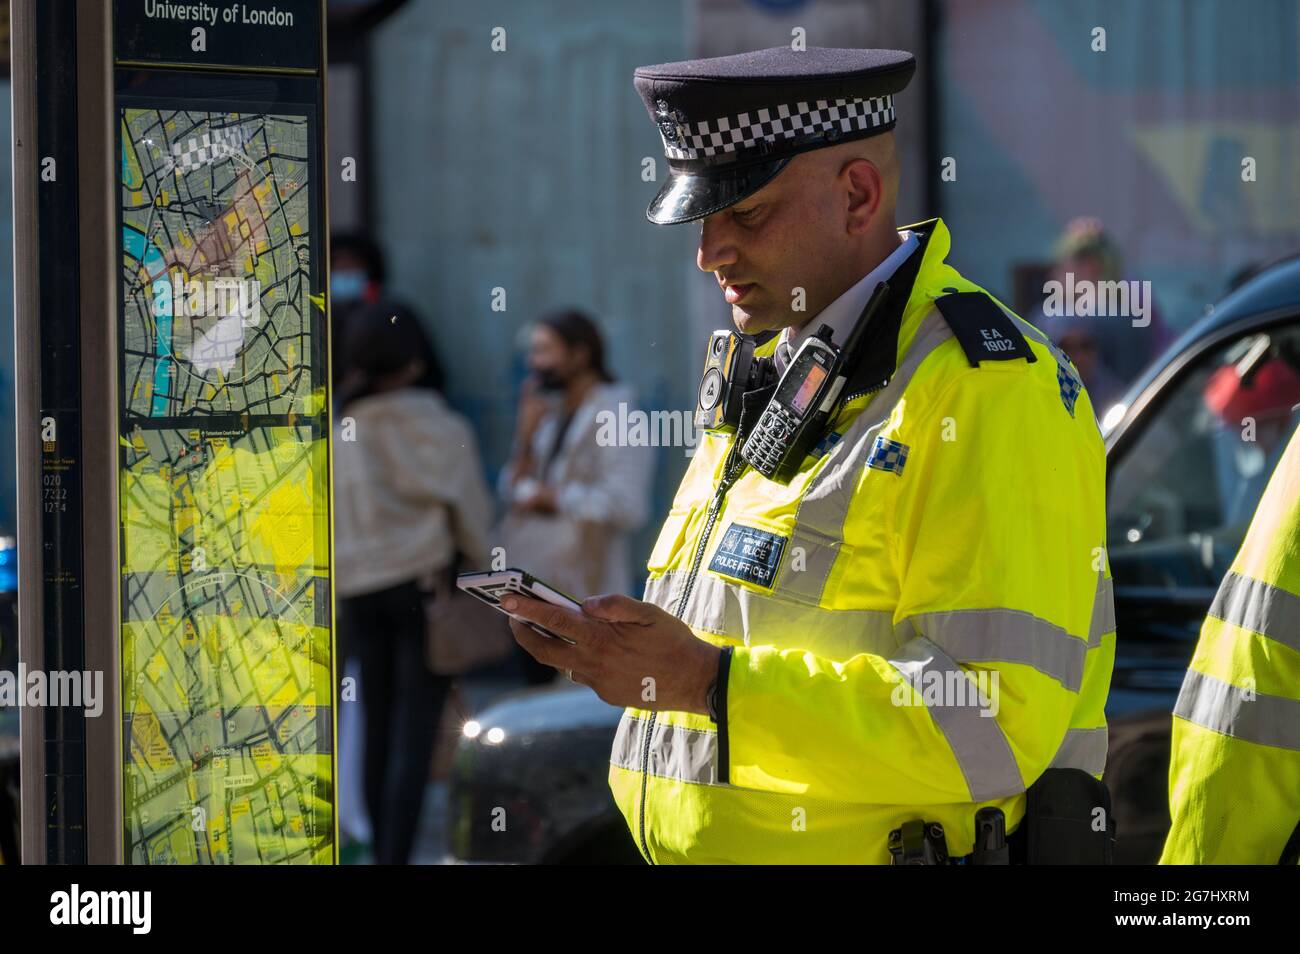 LONDON - MAY 29, 2021: British police officer in a high visibility jacket looks at a mobile cell phone Stock Photo